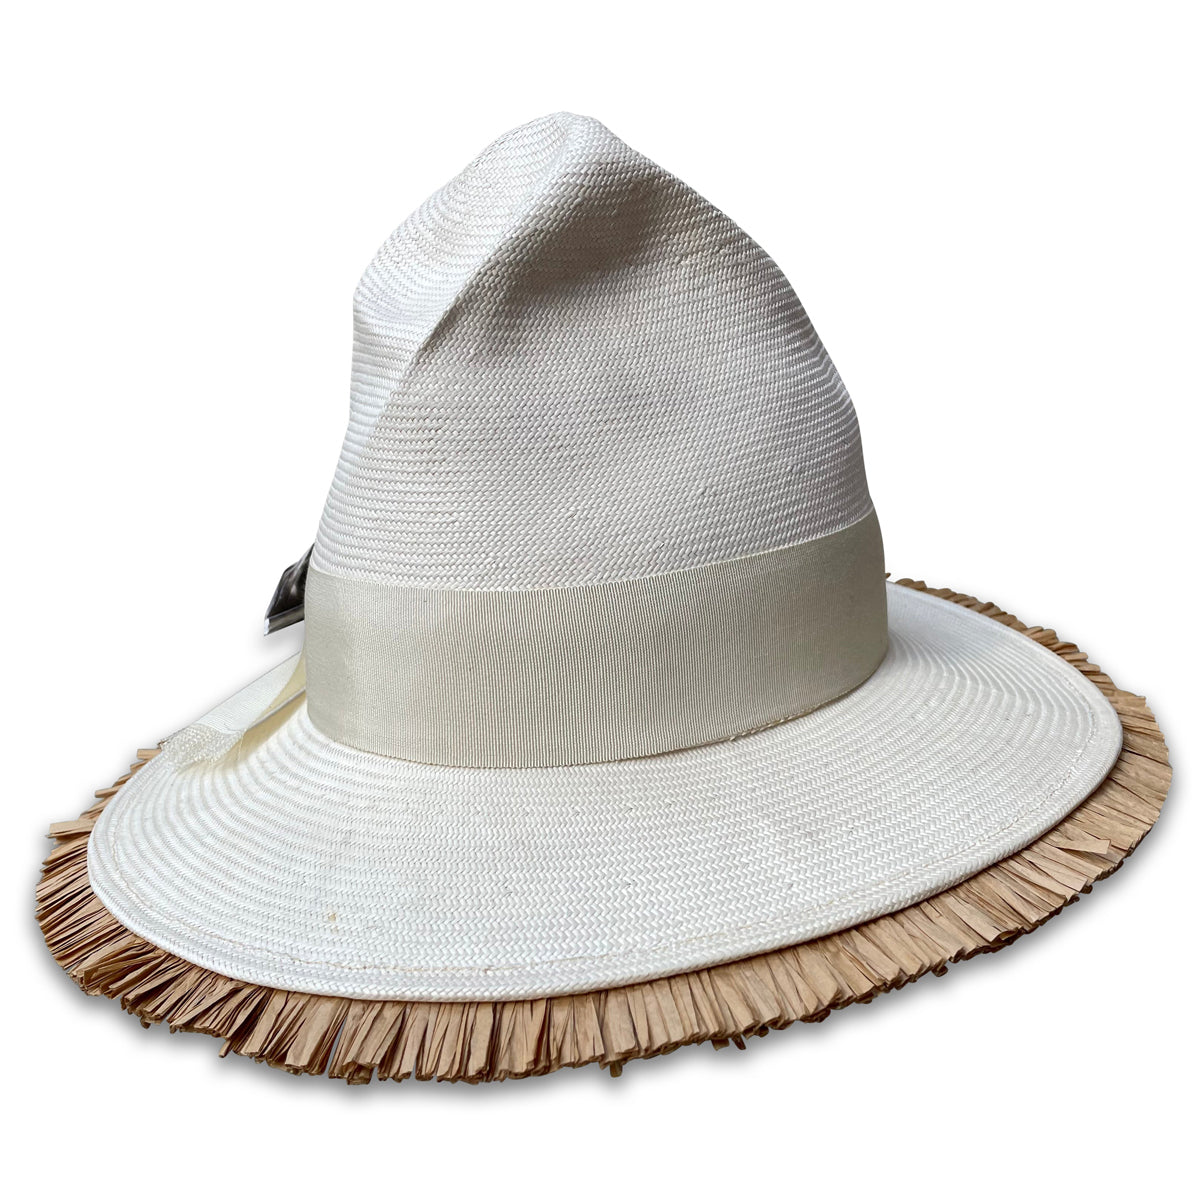 dramatic shantung straw hat made-to-order